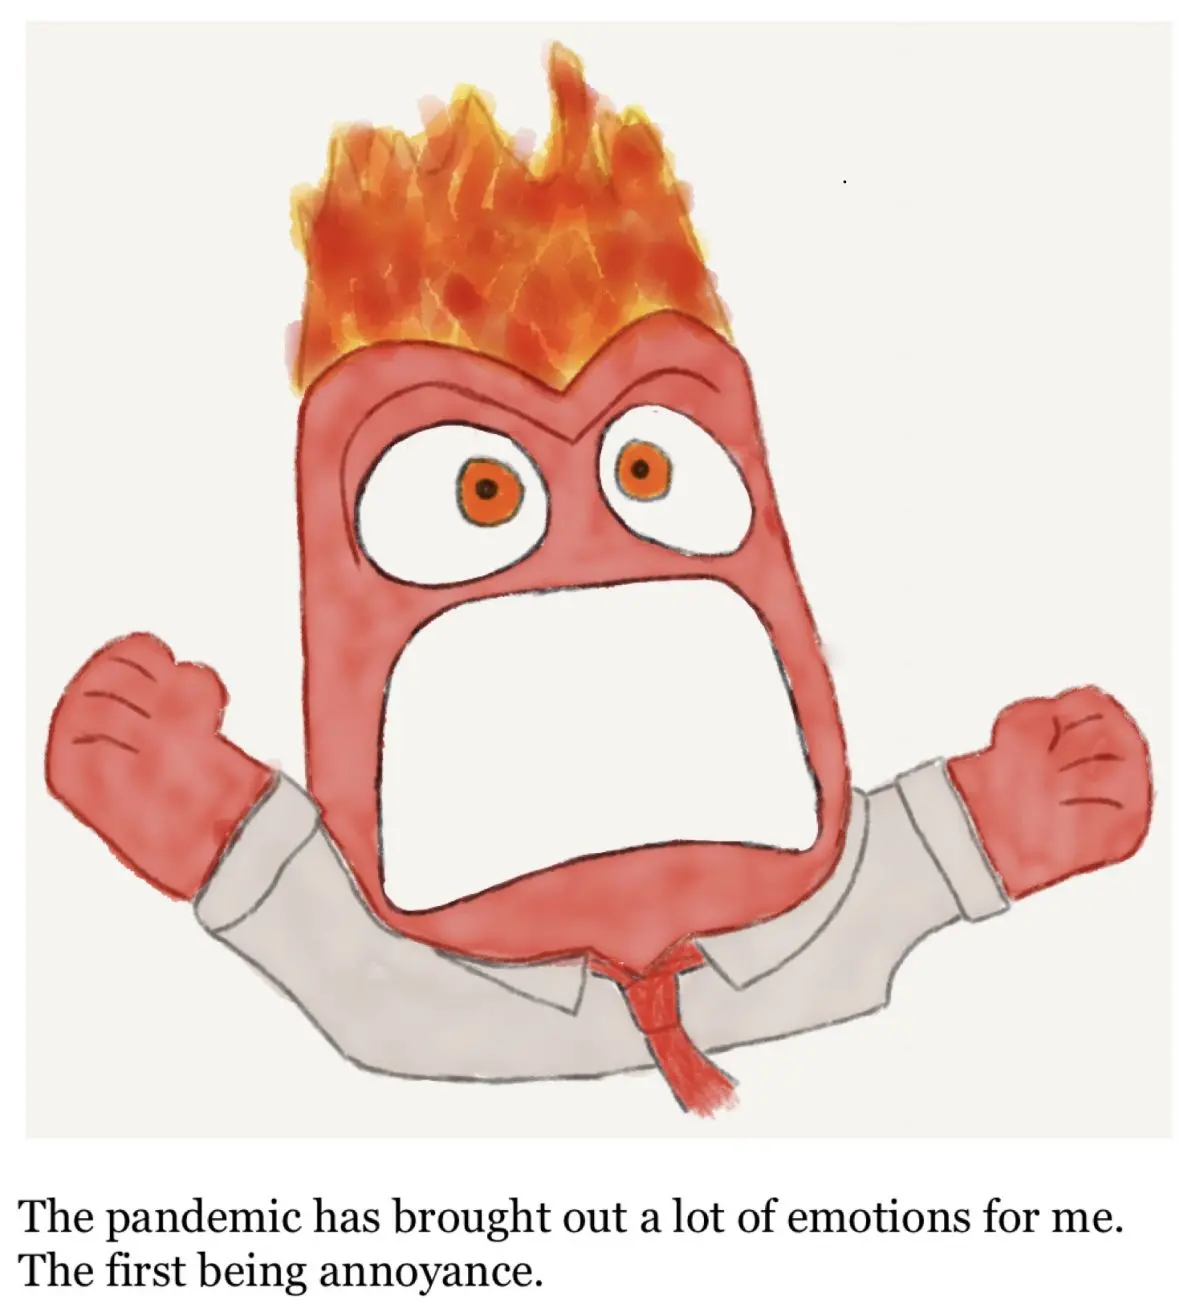 Image of red cartoon character looking angry with flames coming out of head. Red cartoon has mouth open yelling wearing a grey shirt and red tie. Text below cartoon reads "The pandemic has brought out a lot of emotions for me. The first being annoyance."